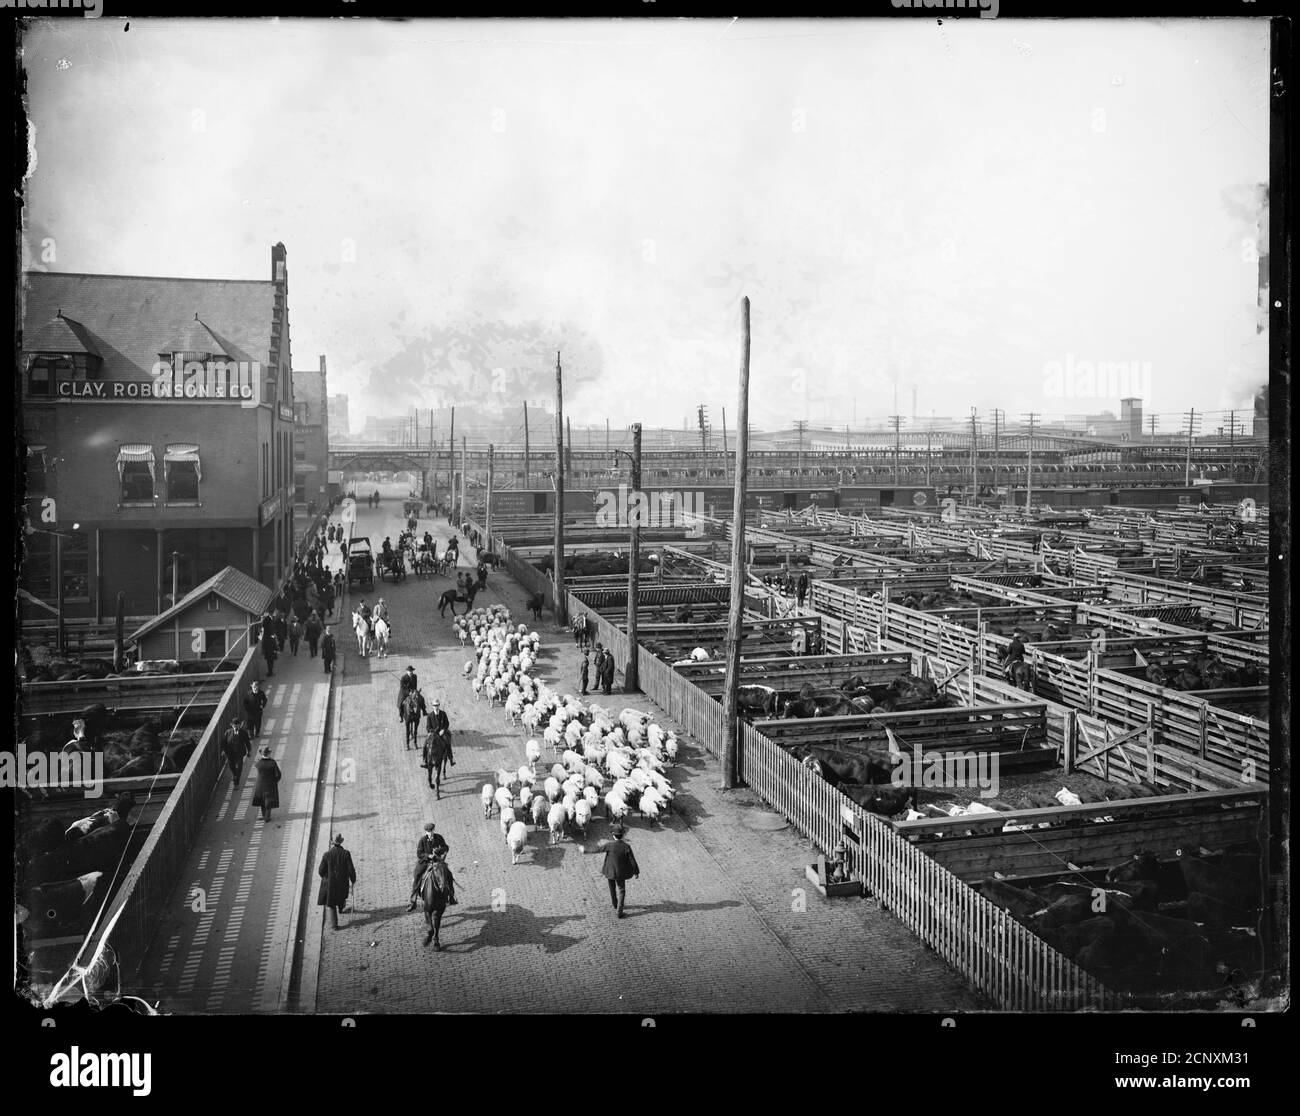 Livestock pens and workers herding sheep at the Union Stock Yards, Chicago, Illinois, circa 1910. Stock Photo